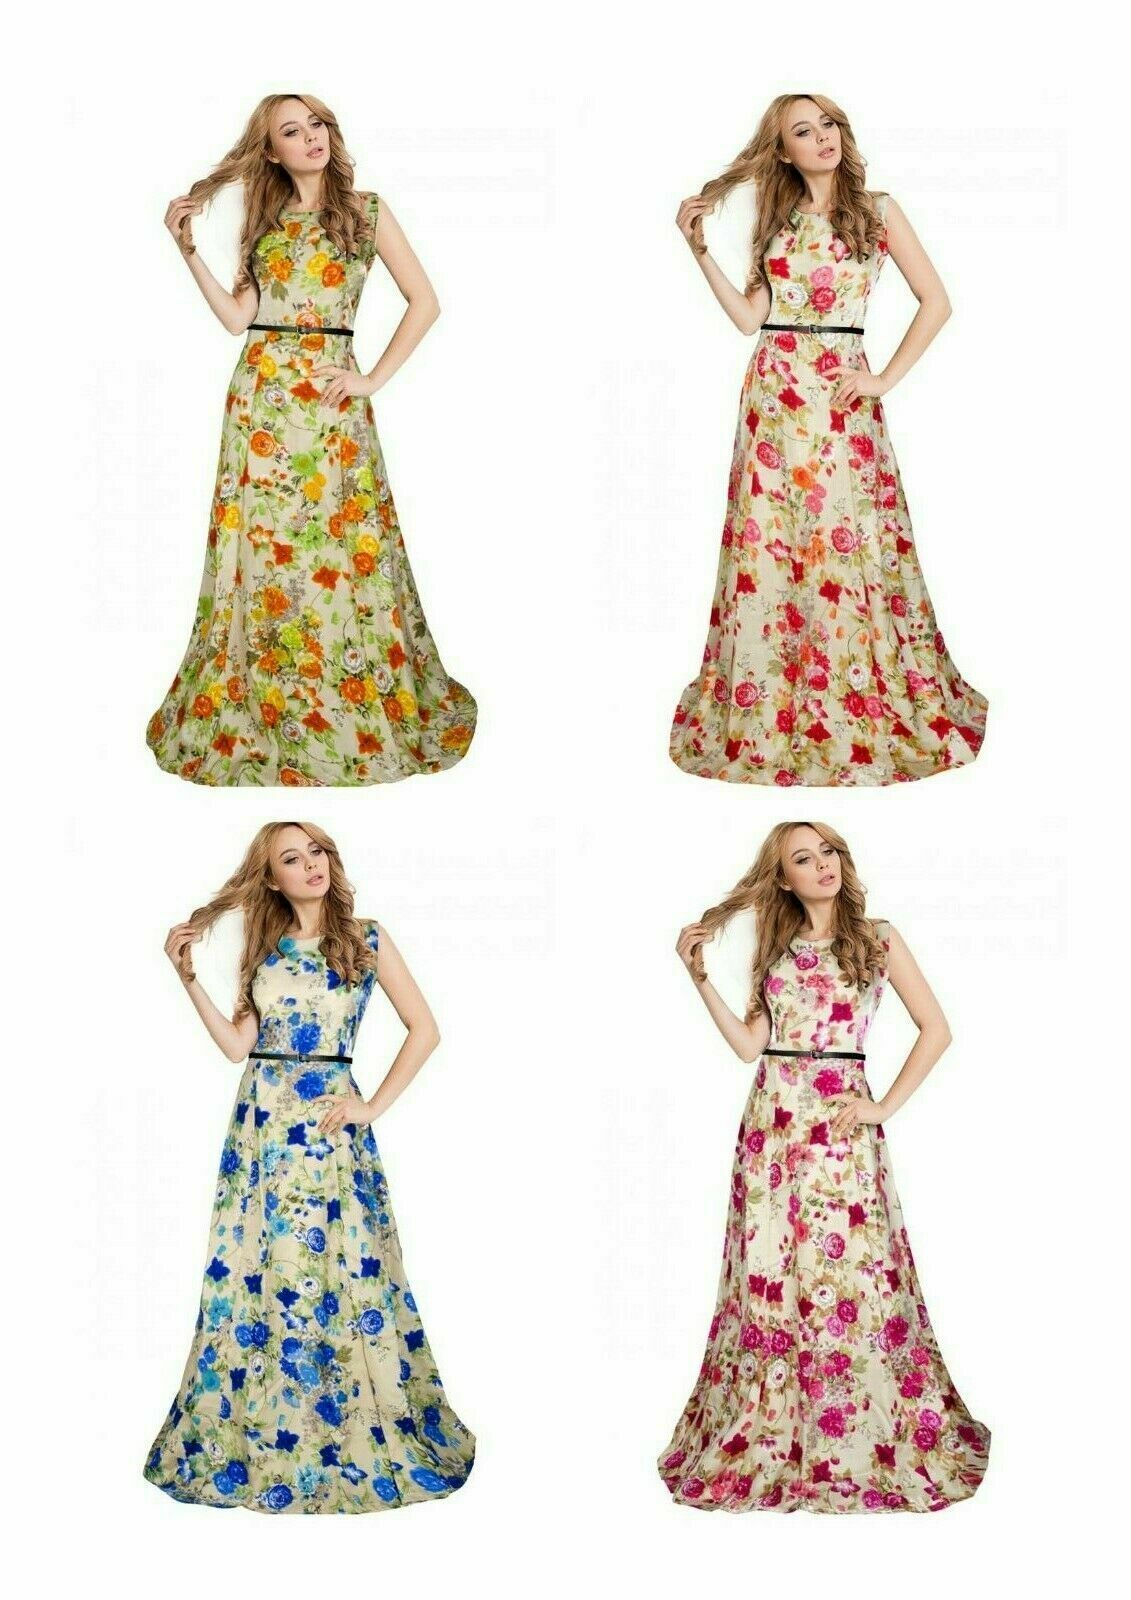 Party Wear Printed Indian Wedding Evening ethinc Floral Desginer Top Crop Gown